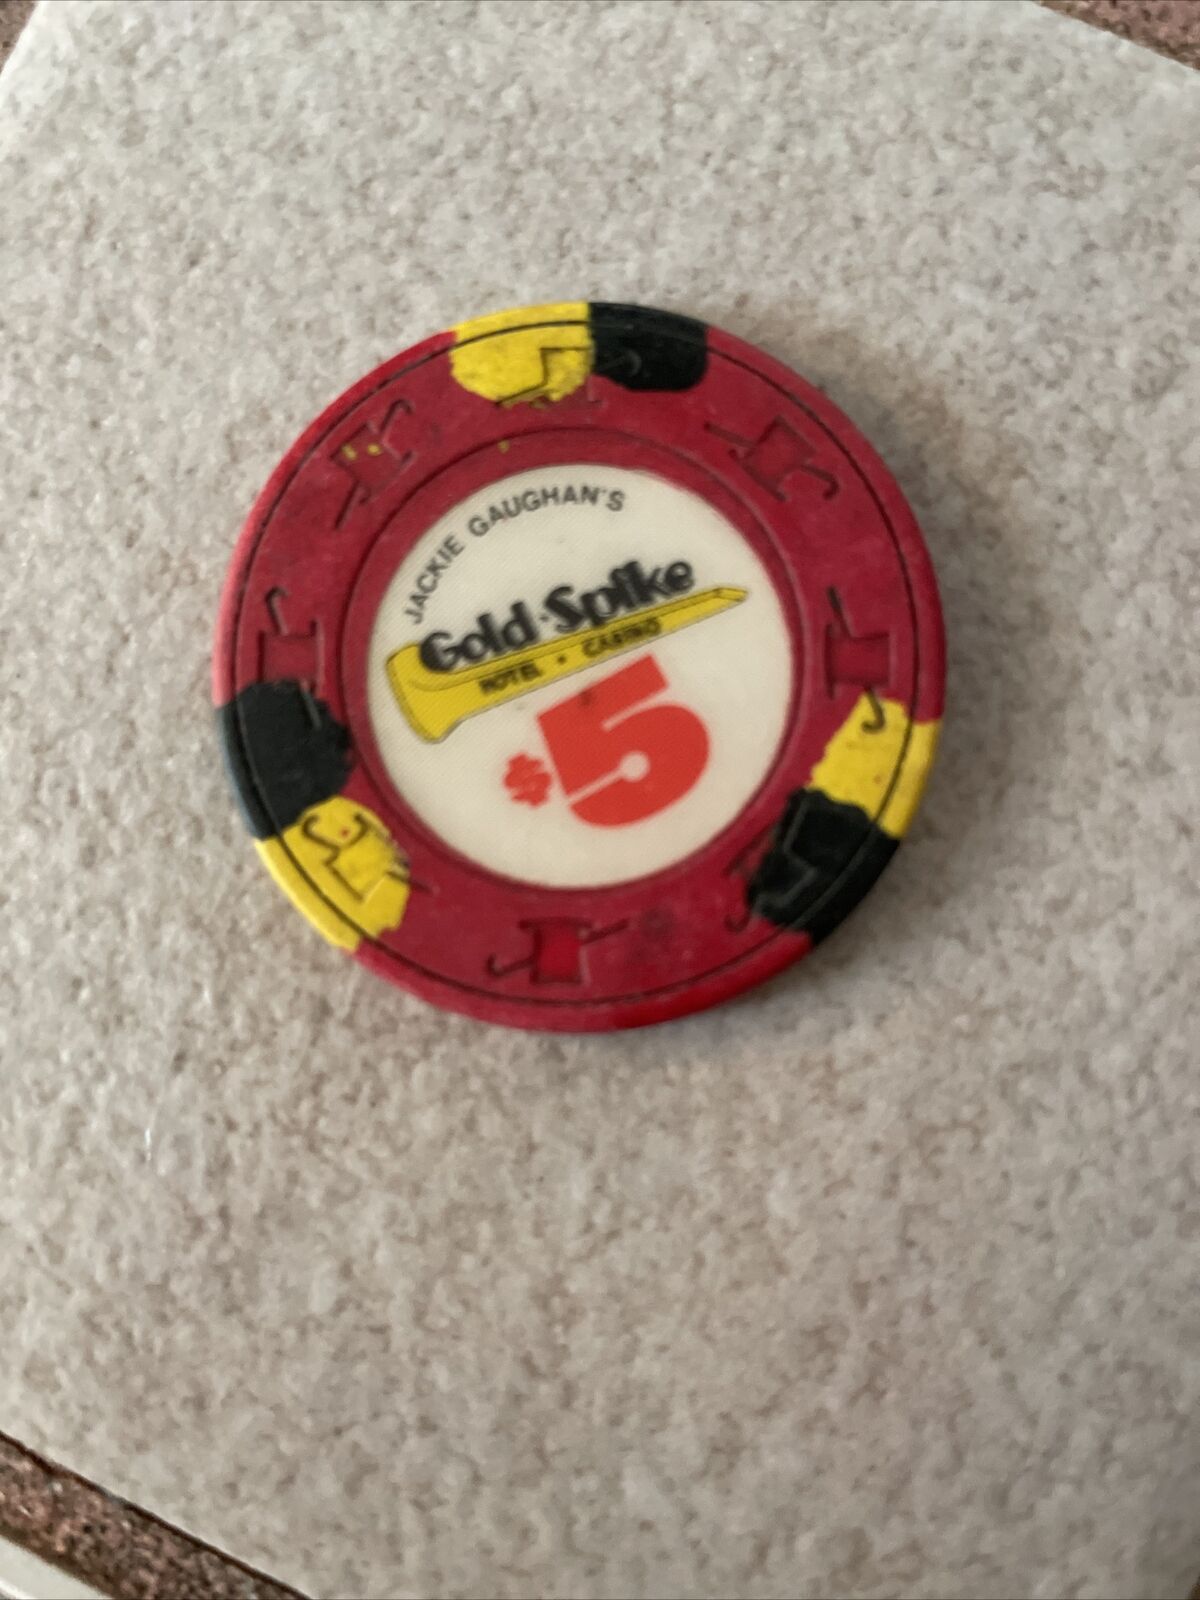 5.00 Chip from the Gold Spike Casino Las Vegas Nevada Gaughans